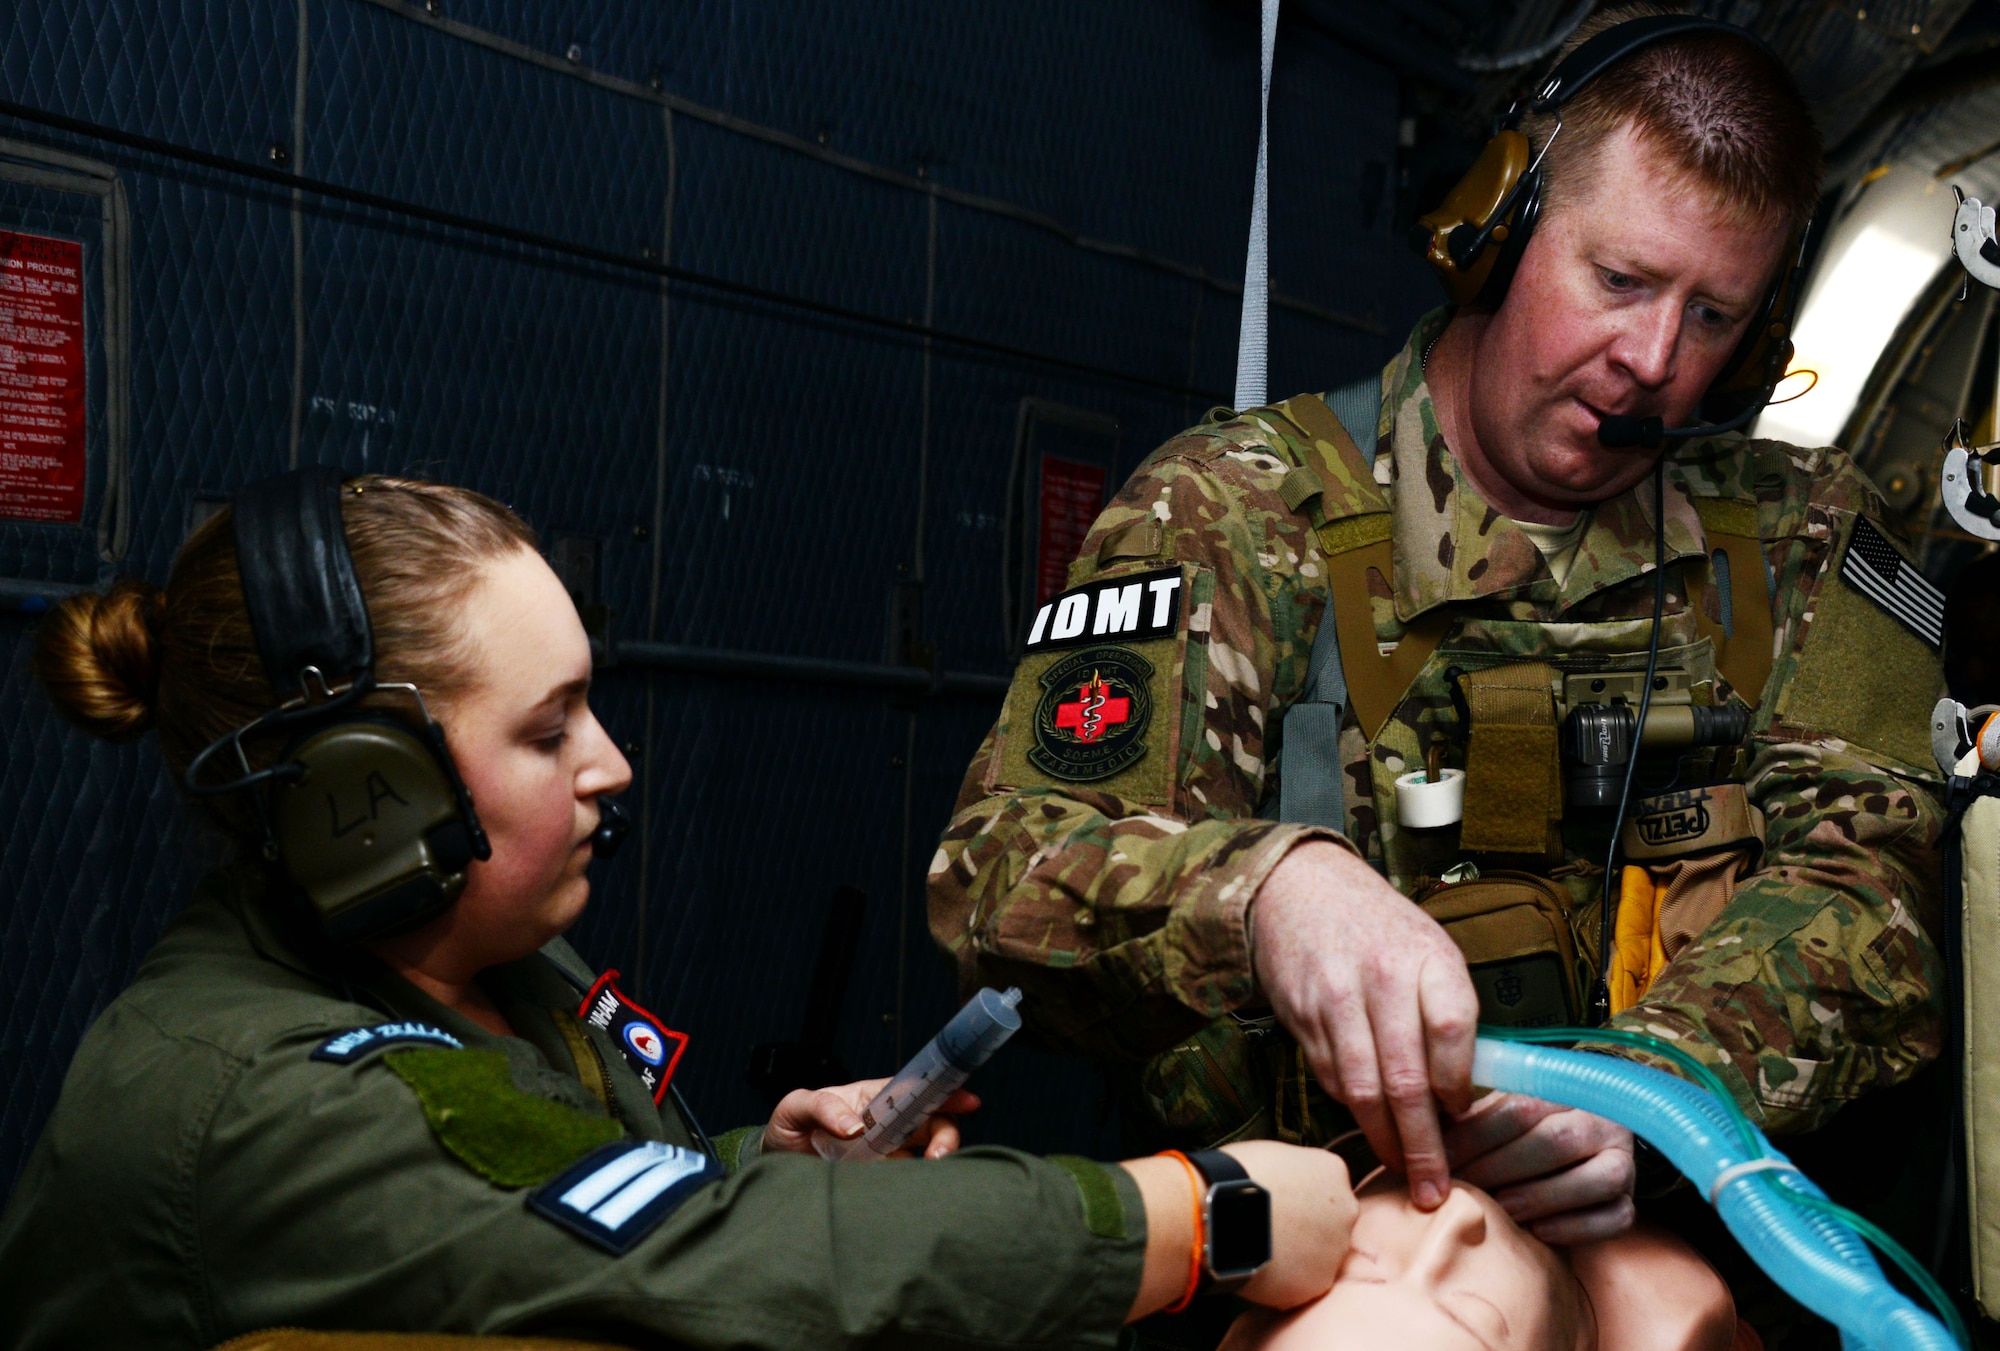 U.S. Air Force Staff Sgt. Jeffrey Tremel, a 353rd Special Operations Support Squadron Independent Duty Medical Technician, conducts advanced airway management techniques with a Royal New Zealand Air Force medic during casualty evacuation training on board an MC-130H Combat Talon II June 20, 2016.  Members from the 353rd Special Operations Group participated in Exercise Teak Net June 12 through 30 in Whenuapai, New Zealand. (U.S. Air Force photo by Master Sgt. Kristine Dreyer)